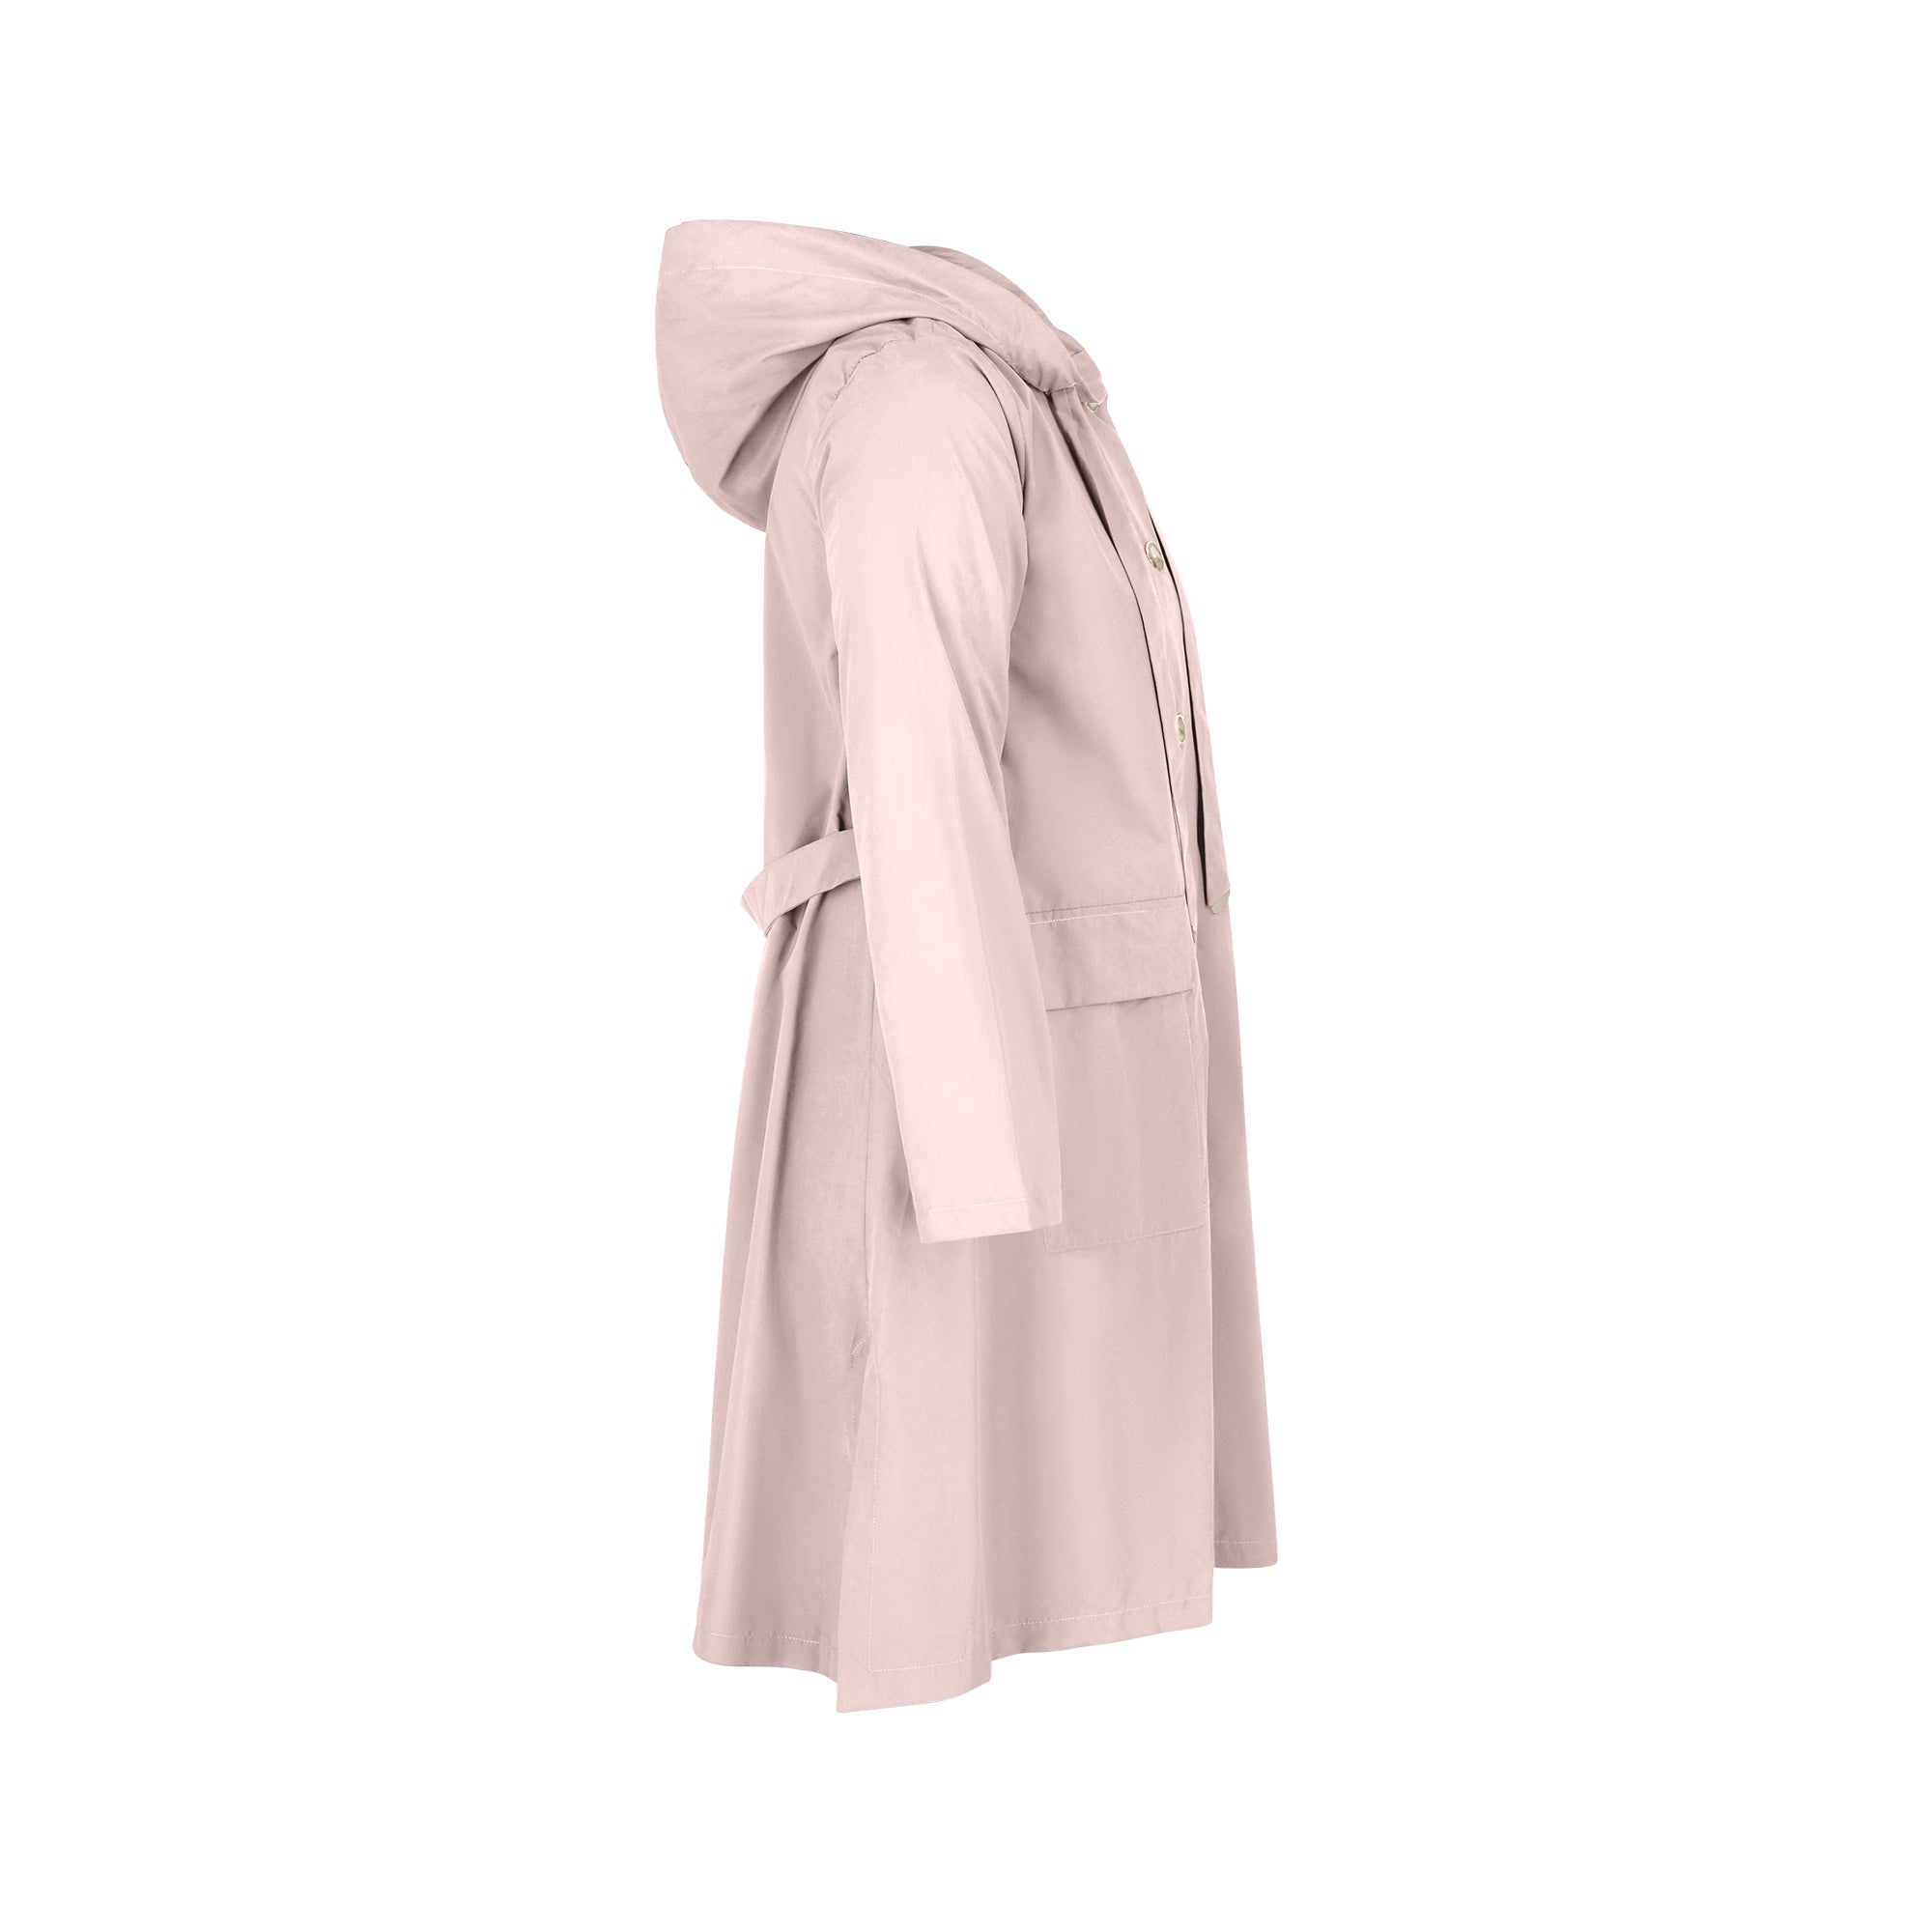 The classic raincoat - nude color - side view